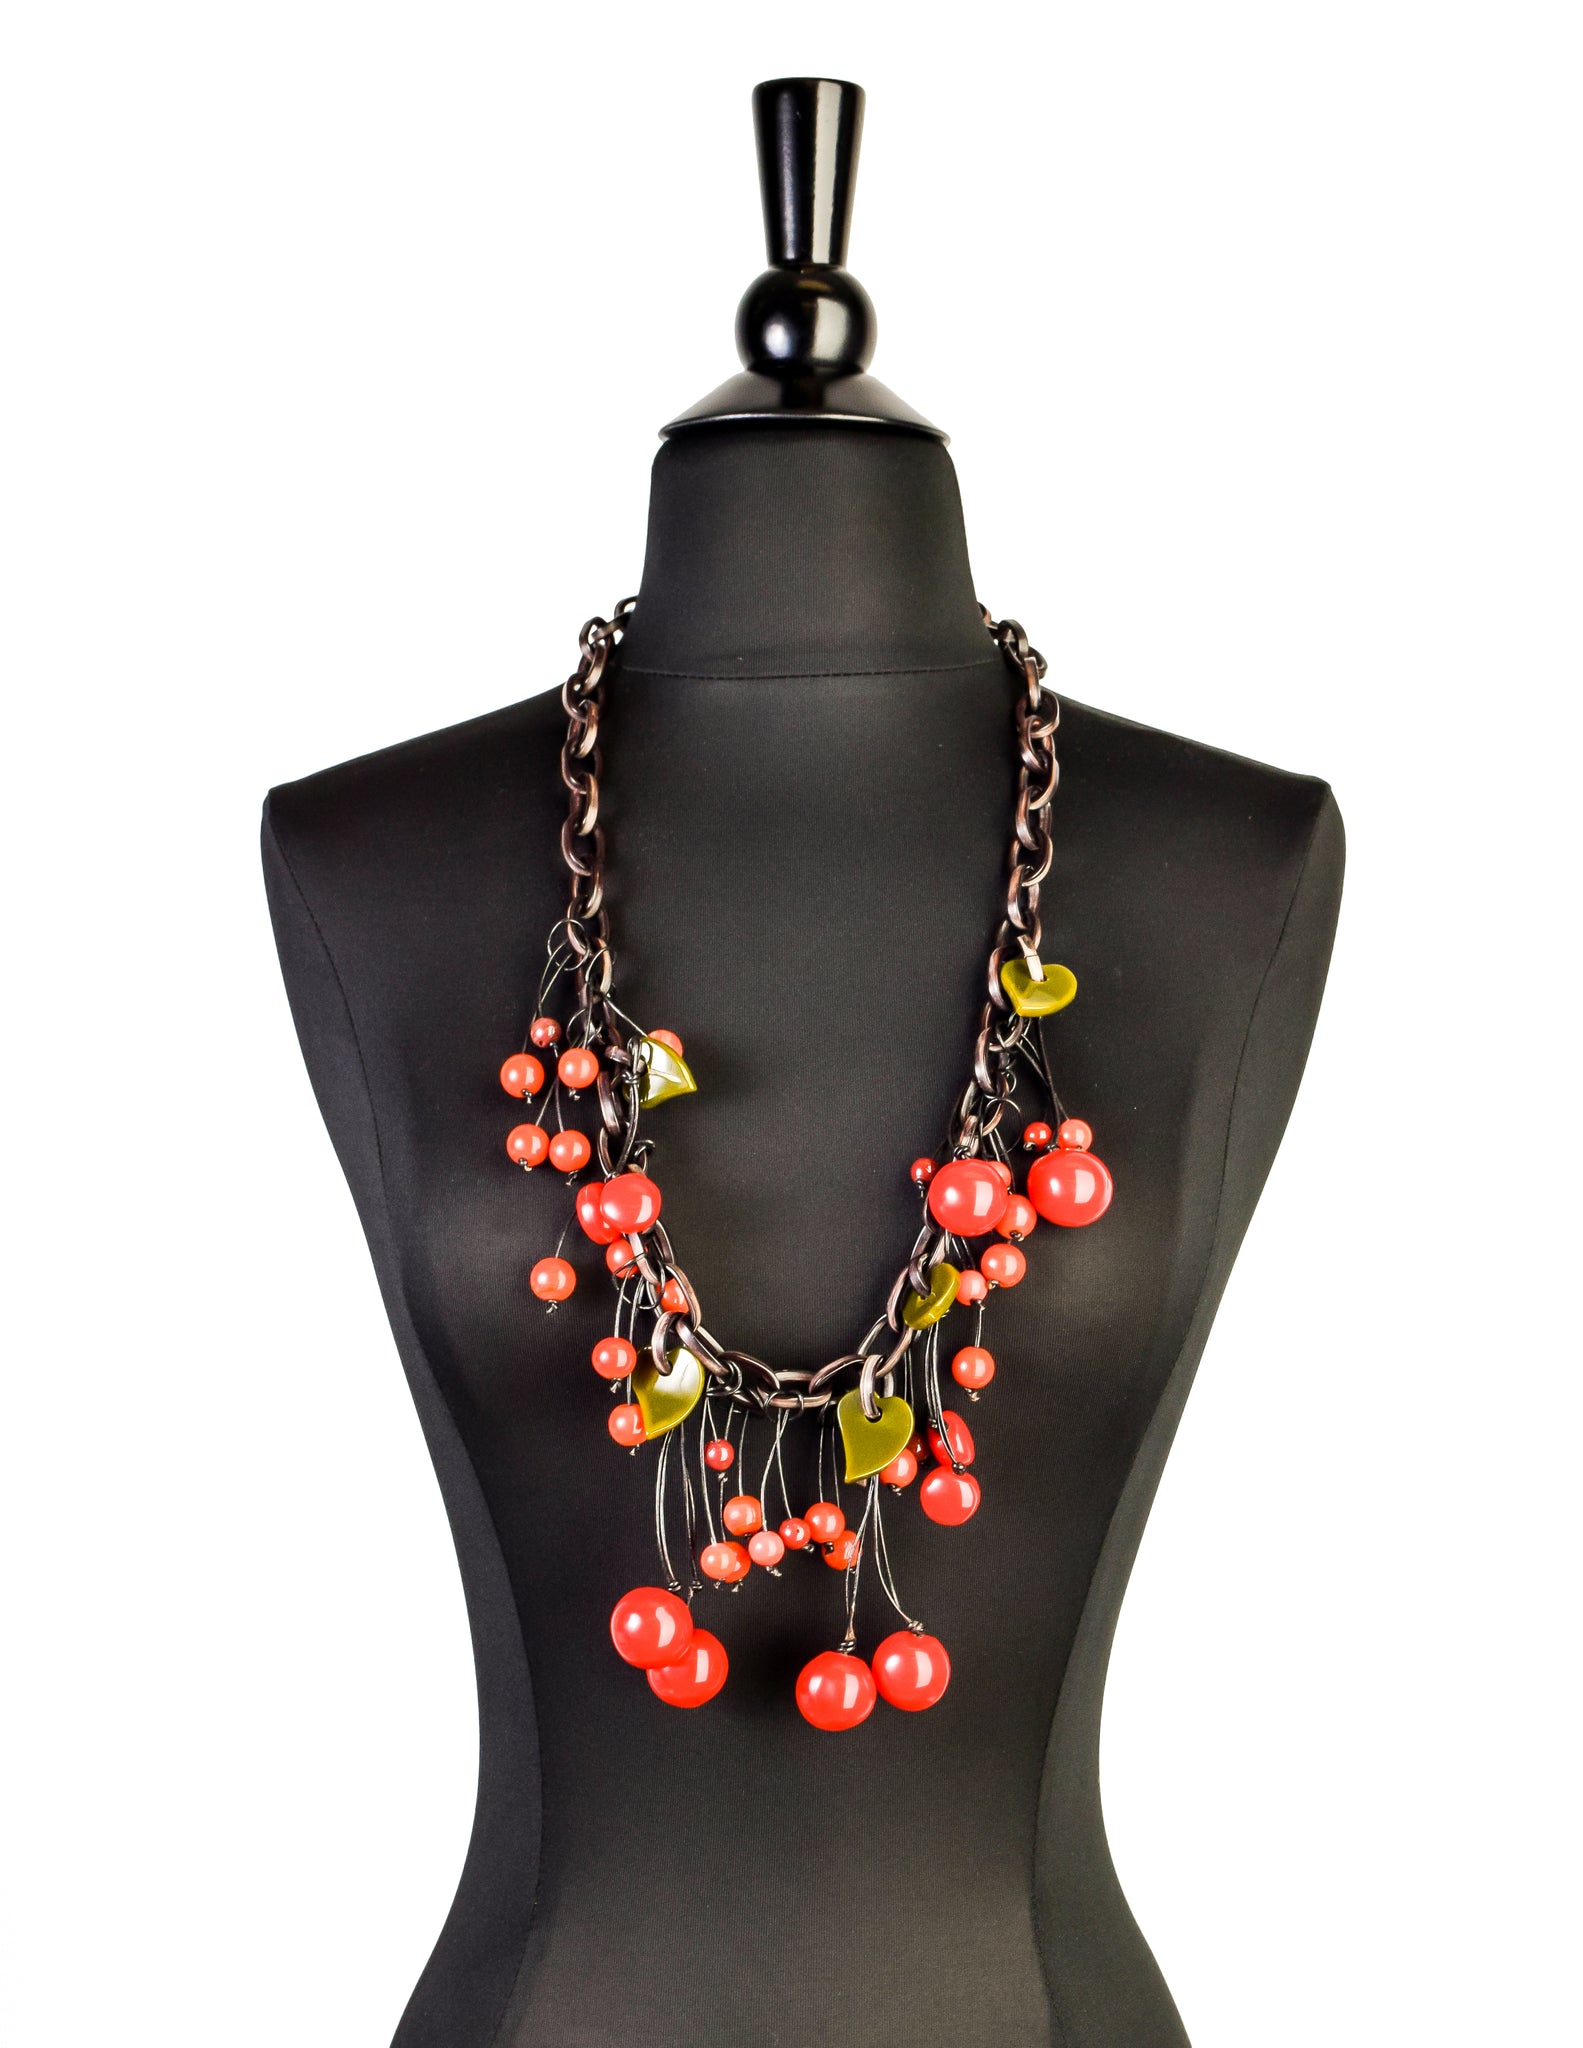 Moschino Vintage Cherry Chain Necklace and Bracelet Set